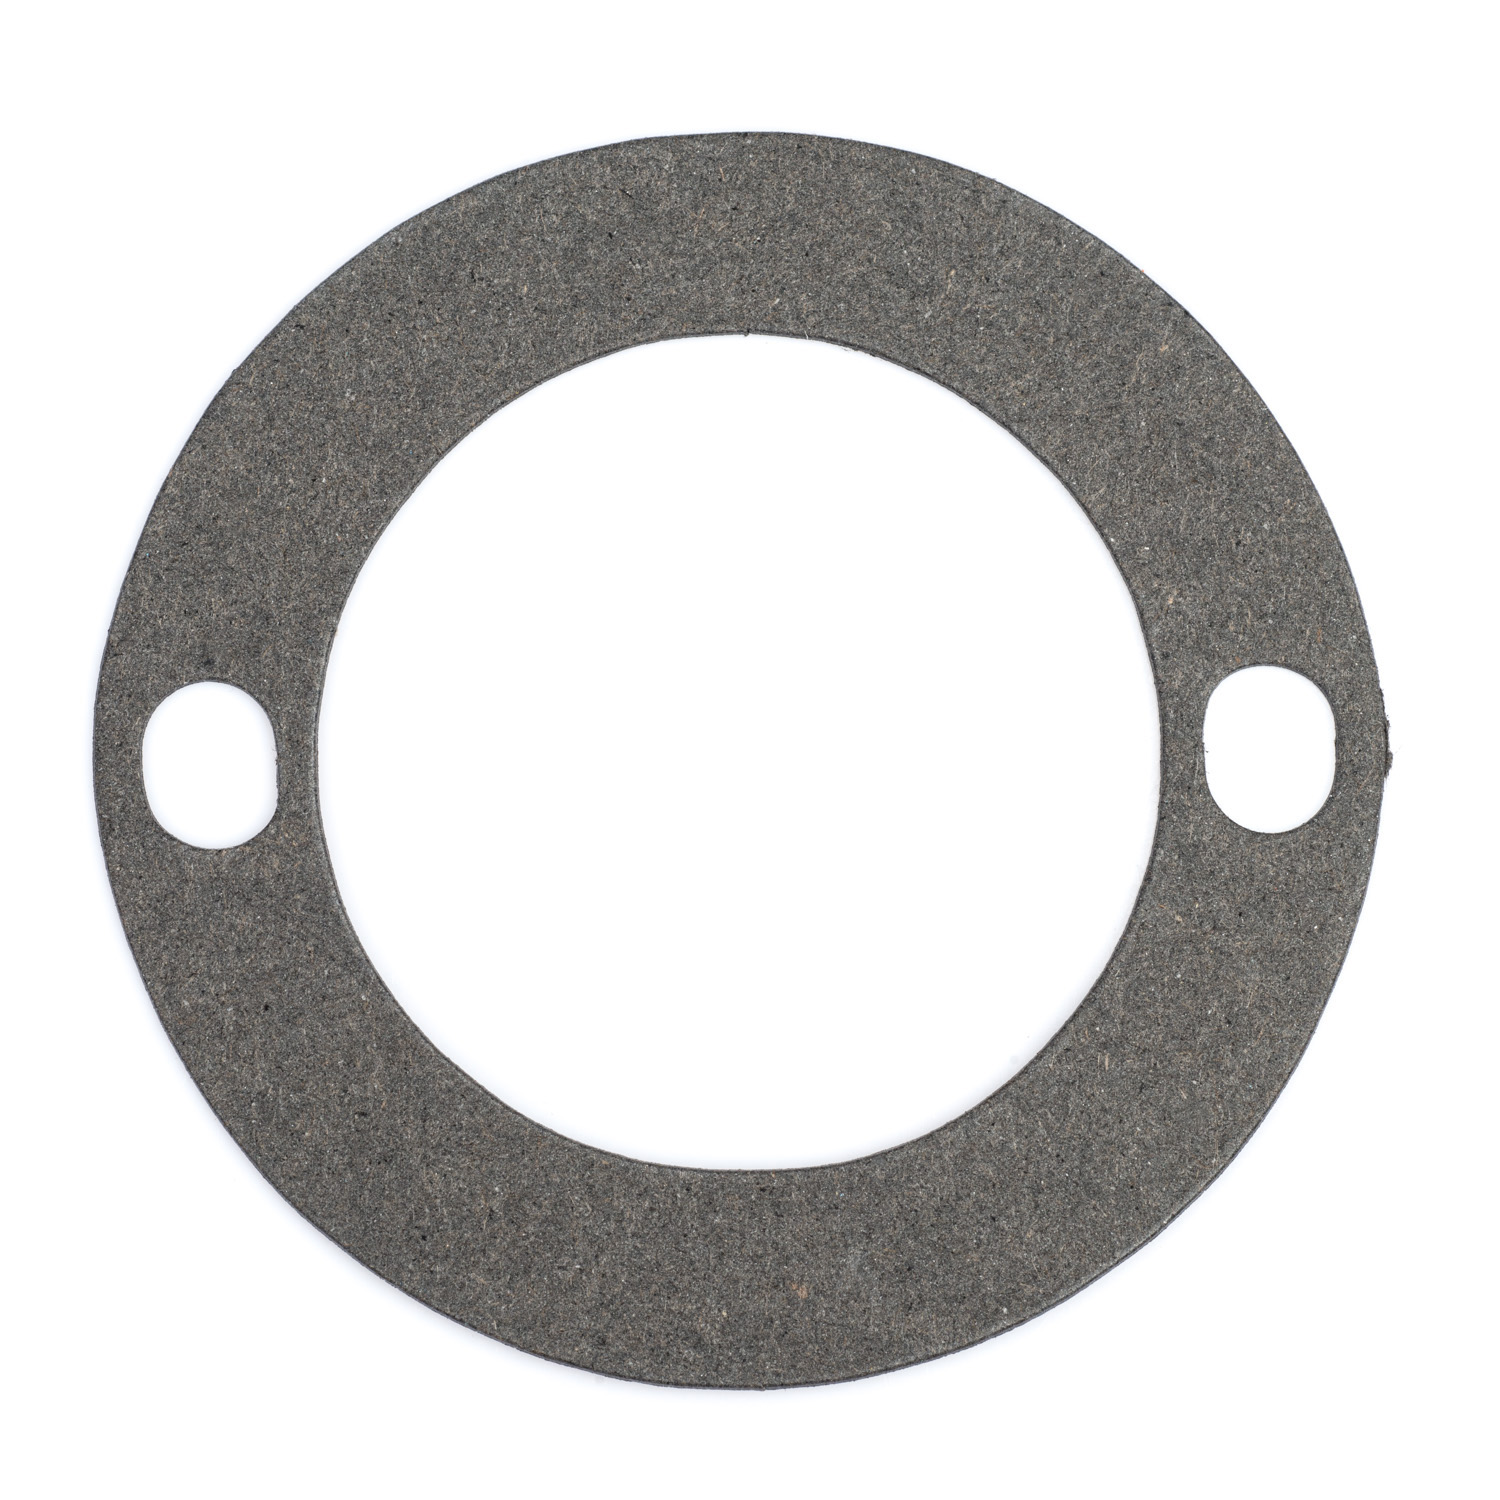 XS2 Oil Filter Strainer Cover Gasket